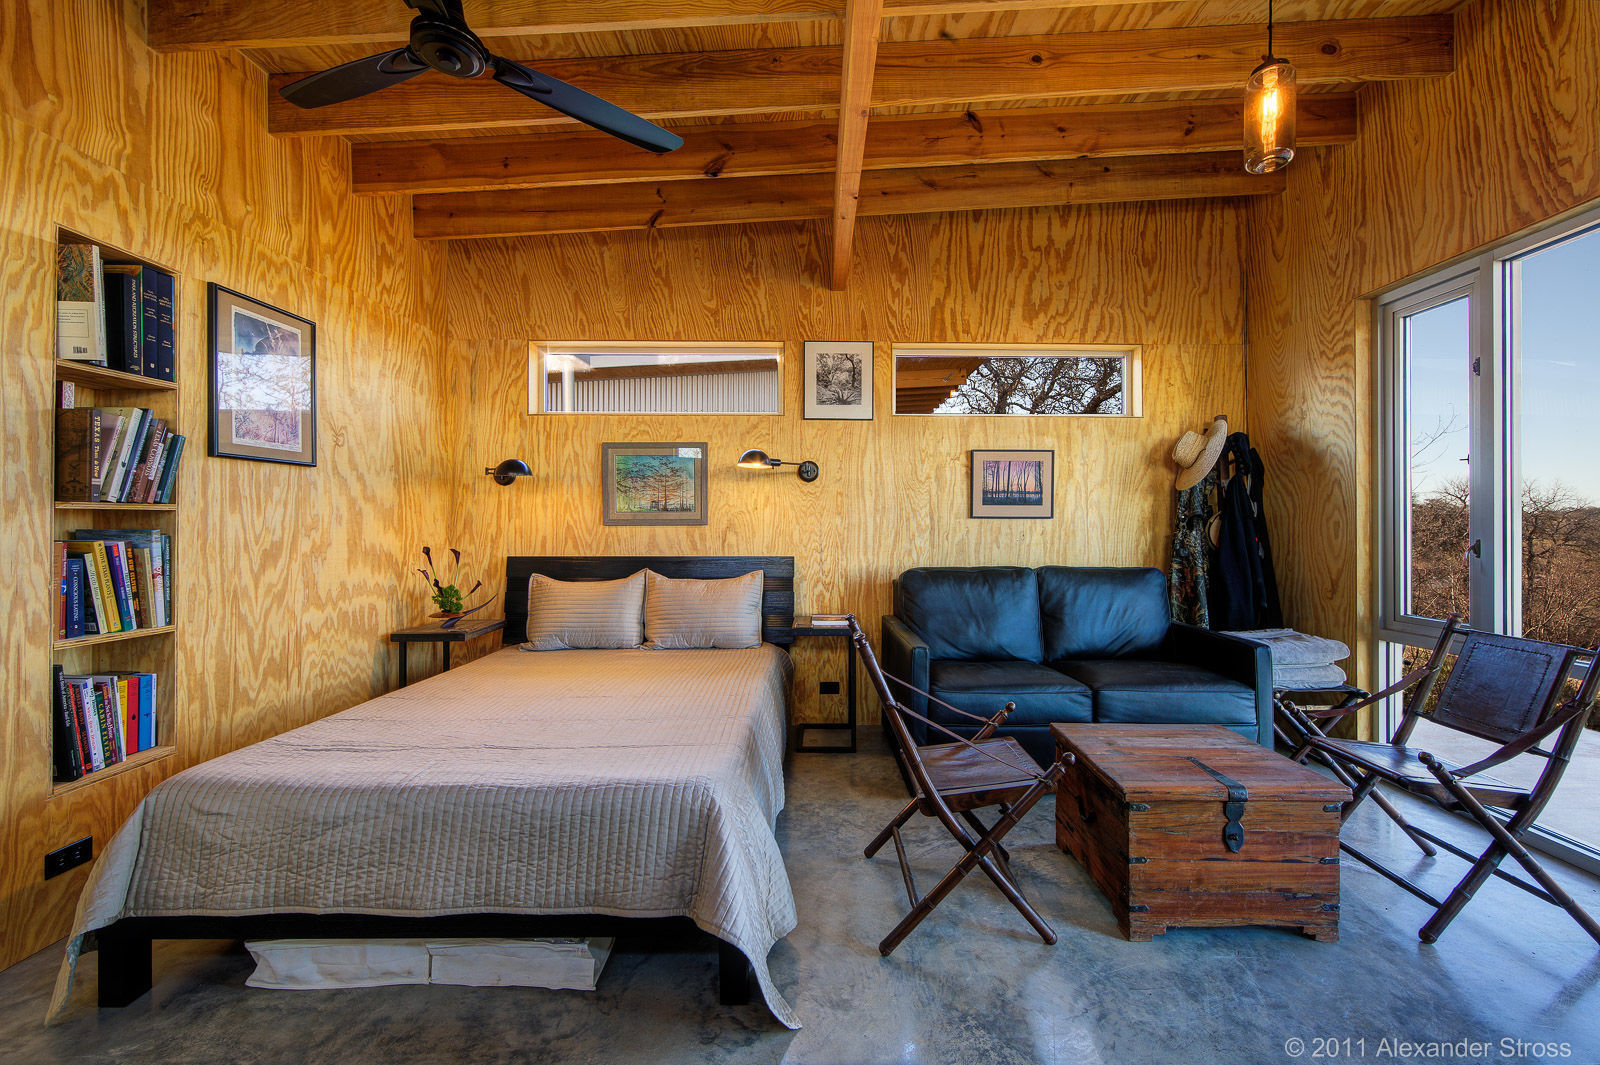 Interior of a tiny home that has wood walls and ceiling that contrast with the textured cement flooring.